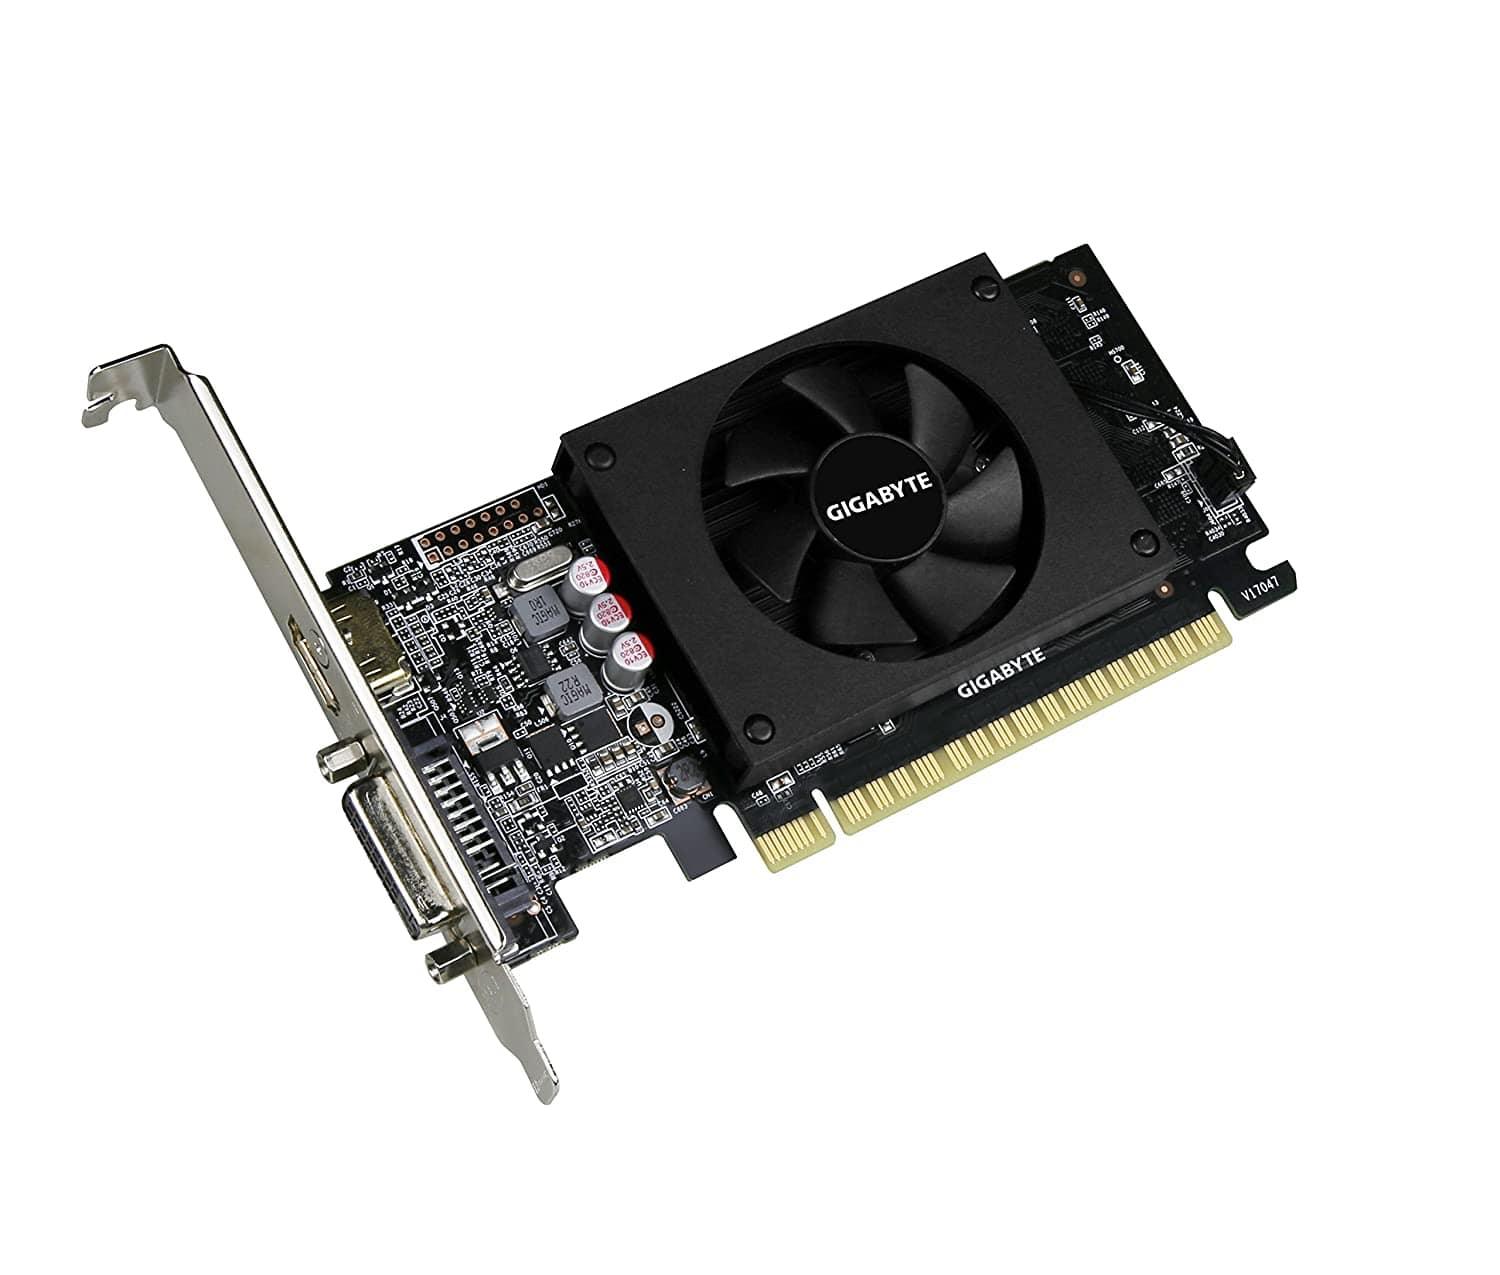 Gigabyte GeForce GT 710 2GB Graphic Cards Support PCI Express 2.0 X8 Bus Interface. Graphic Cards GV-N710D5-2GL-GRAPHICS CARD-dealsplant